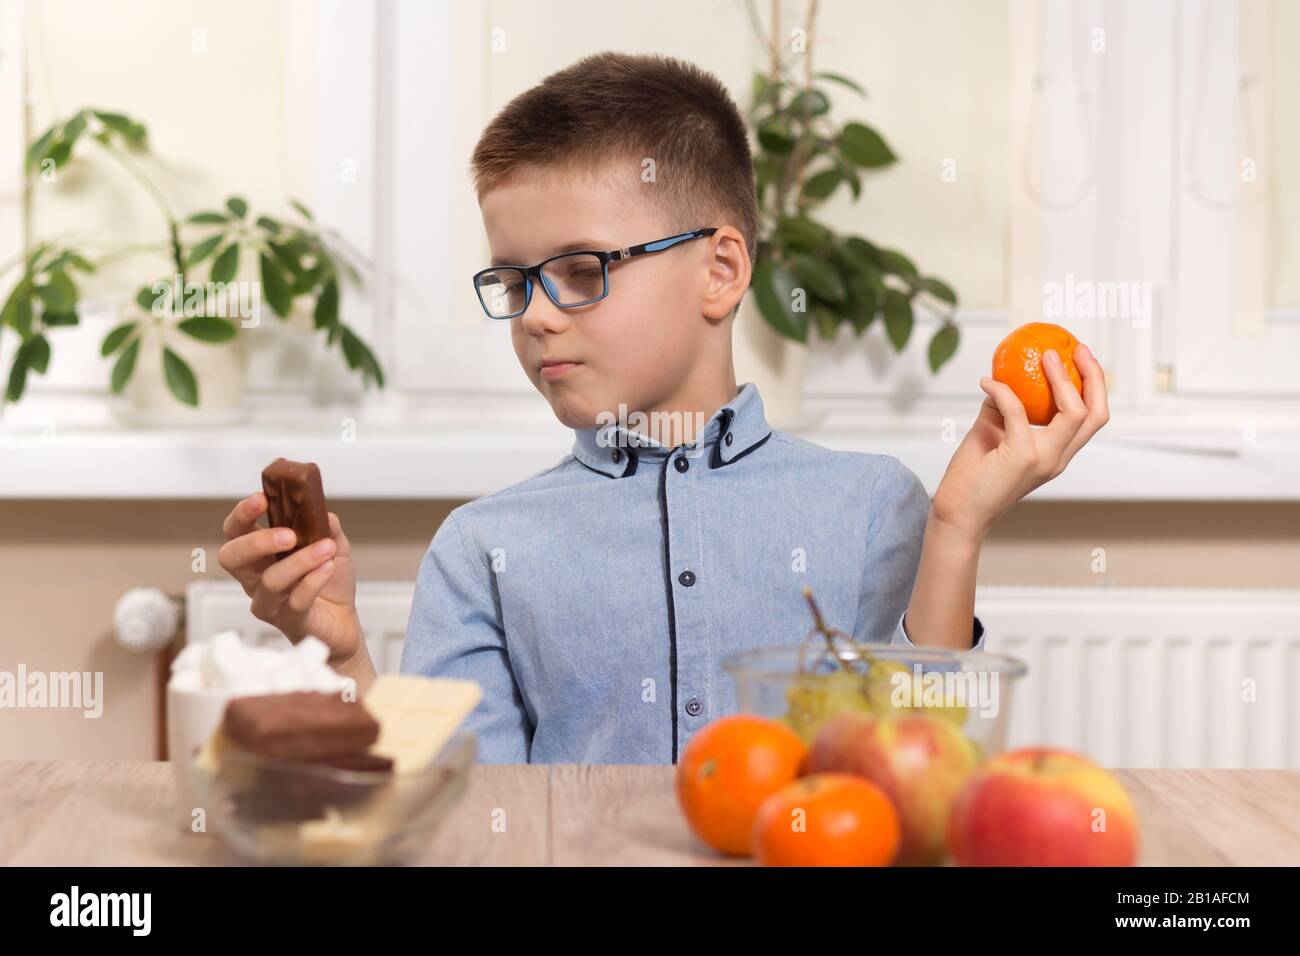 Chocolate bar or tangerine fruit. School-age boy sits at the table and wonders what to choose. Stock Photo